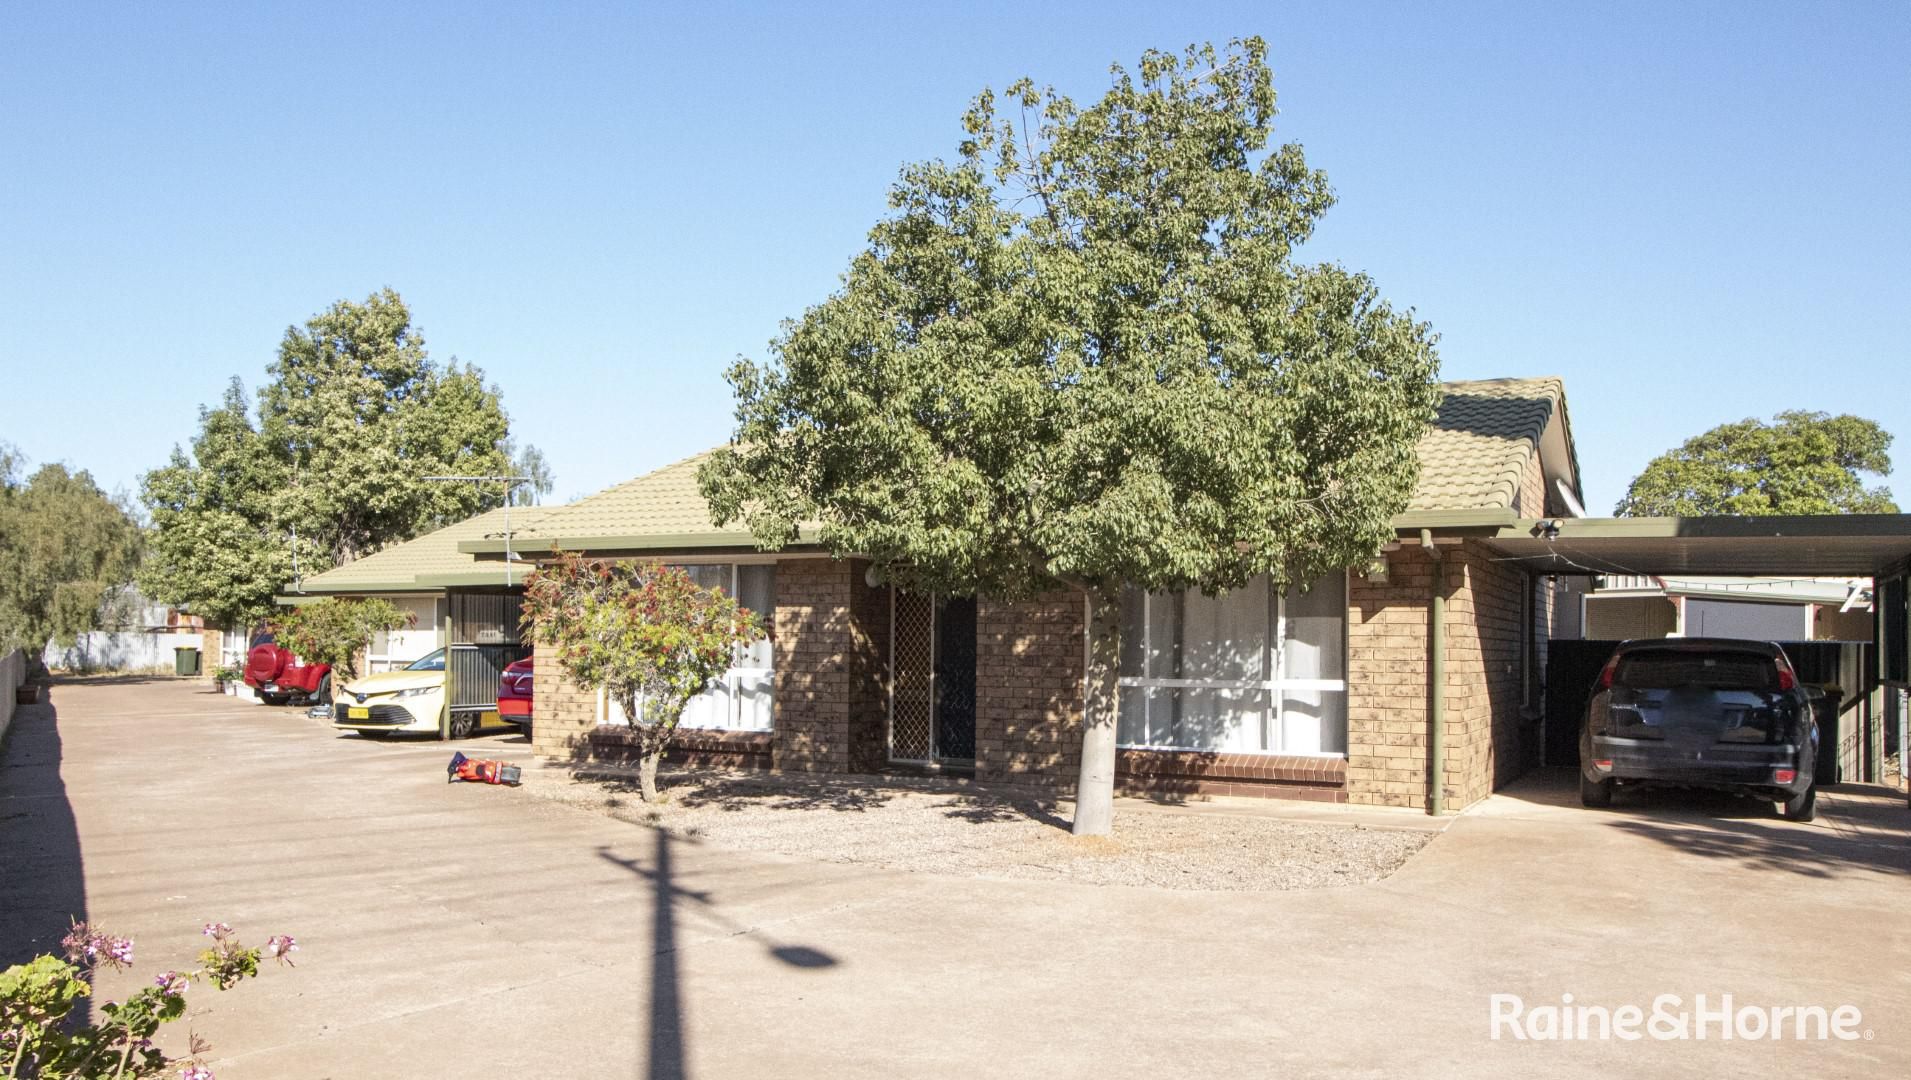 8 bedrooms Block of Units in Units 1 to 4/58 Barry Street PORT AUGUSTA SA, 5700